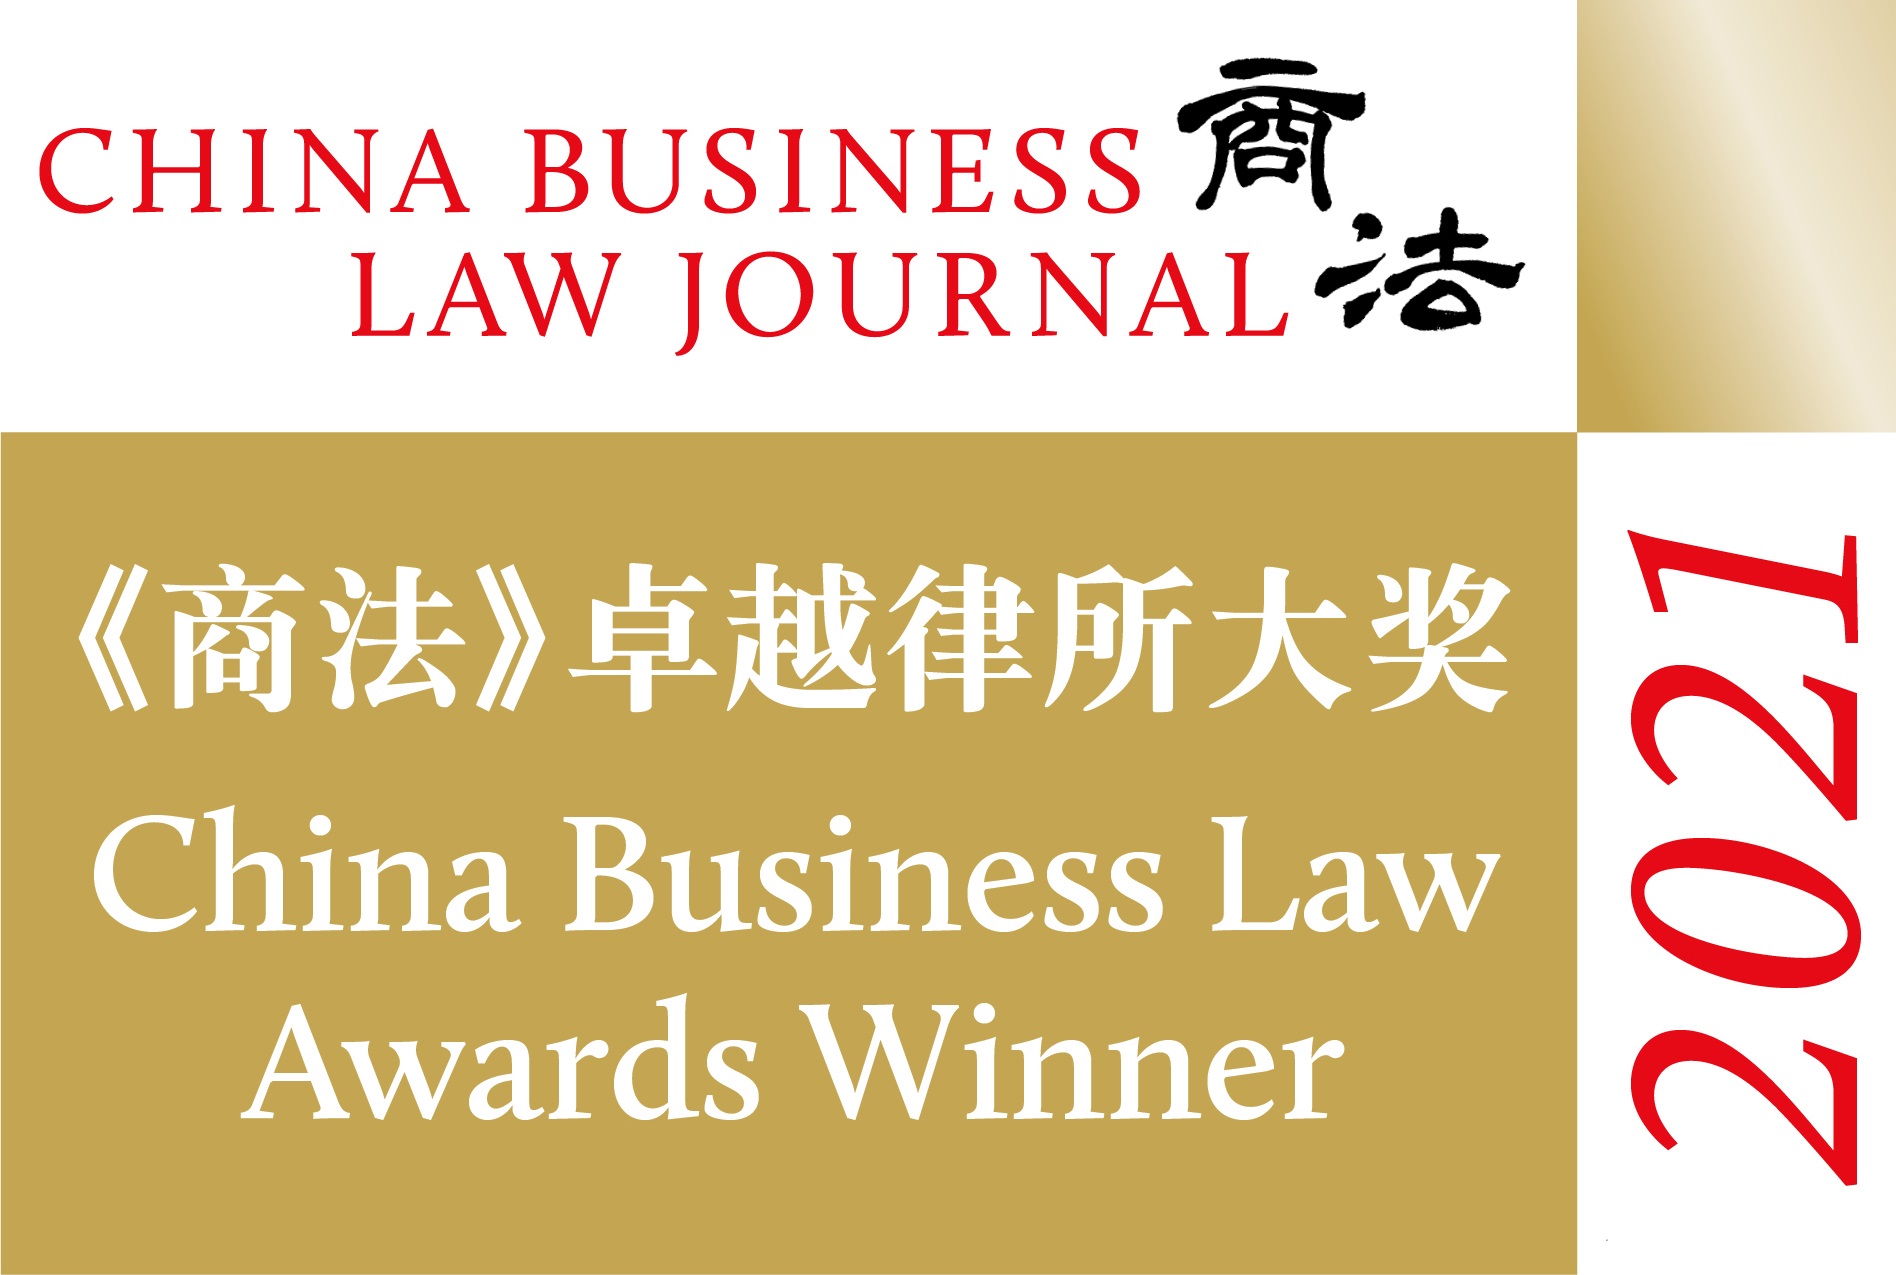 “China Business Law Awards 2021” - “Restructuring & Insolvency – International Firms”